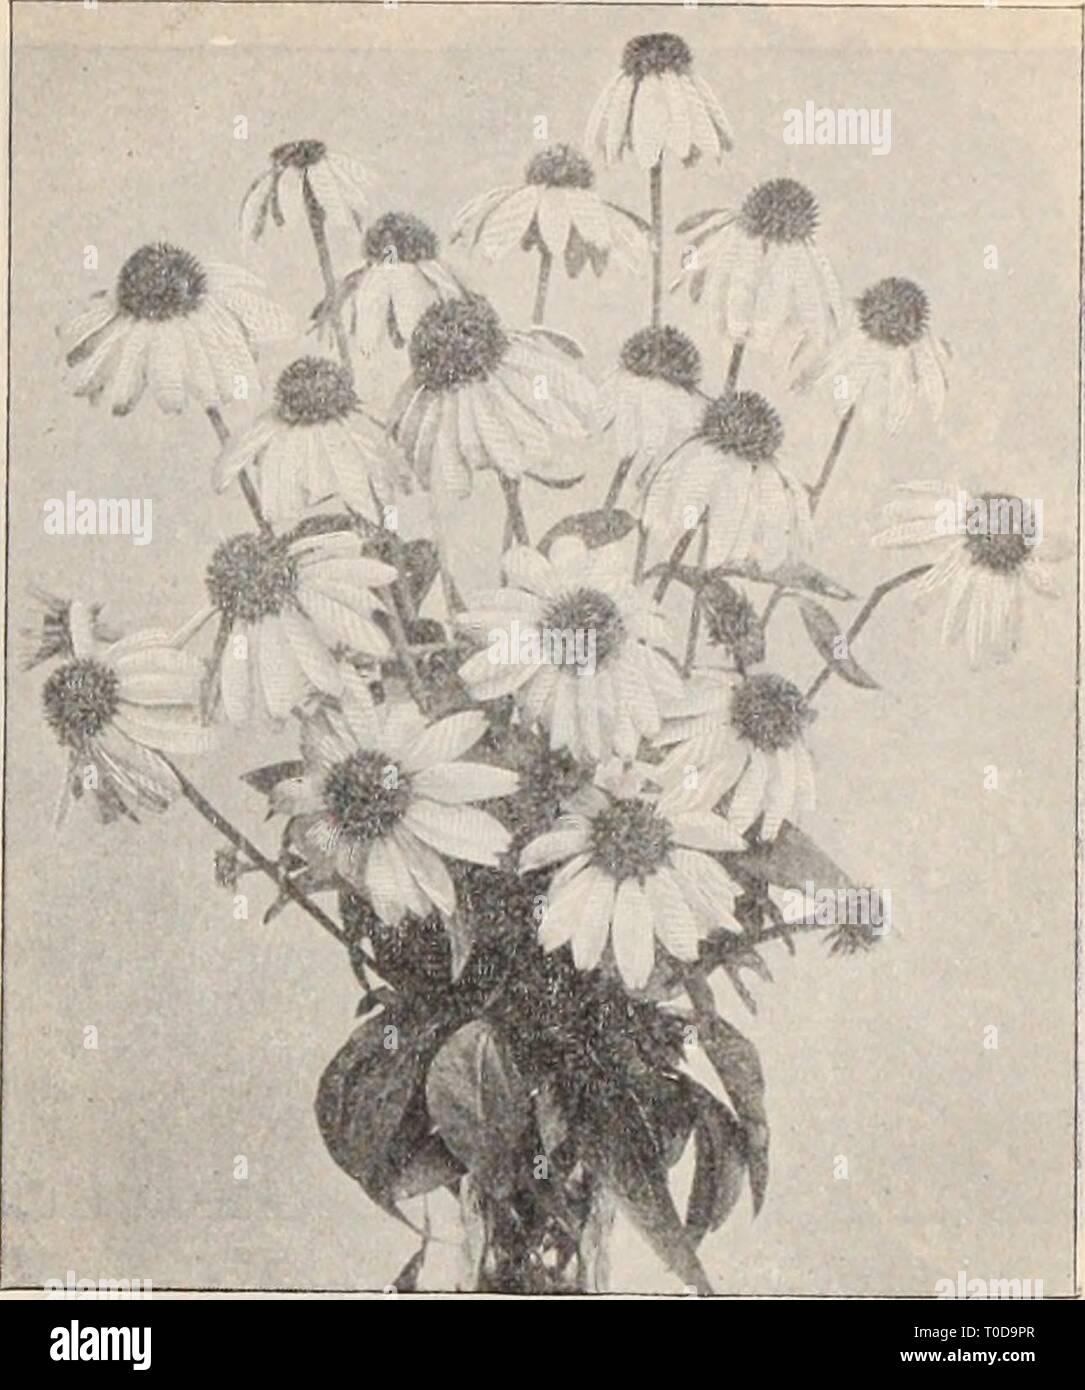 Dreer's wholesale price list  Dreer's wholesale price list / Henry A. Dreer. dreerswholesalep1898dree Year:   'OORmOI'SlS Lanckolata.    Echinacea. DictamnnS (Gas Plant). Per doz. Fraxinella. Pink, very strong 1 00 Fraxinella Alba. '* l 25 Dielytra or Dicentra. Speotabilis. Strong 1 25 Eizimia. Strong 1 00 Digitalis (Fox Glove). Strong plants i 00 Doronicnm (Leopards Bane). Austriacum. Strong plants l 00 Oaucasicum. ' i 50 Excelaum. ' 1 25 Draba (Whitlow Grass). Androsacea. 2i-inch pots 75 Echinacea (Rudbeckia). Purpurea. Strong divisions 1 00 Epimedinm (Barrenwort). Lilacea. Lilac, strong pla Stock Photo